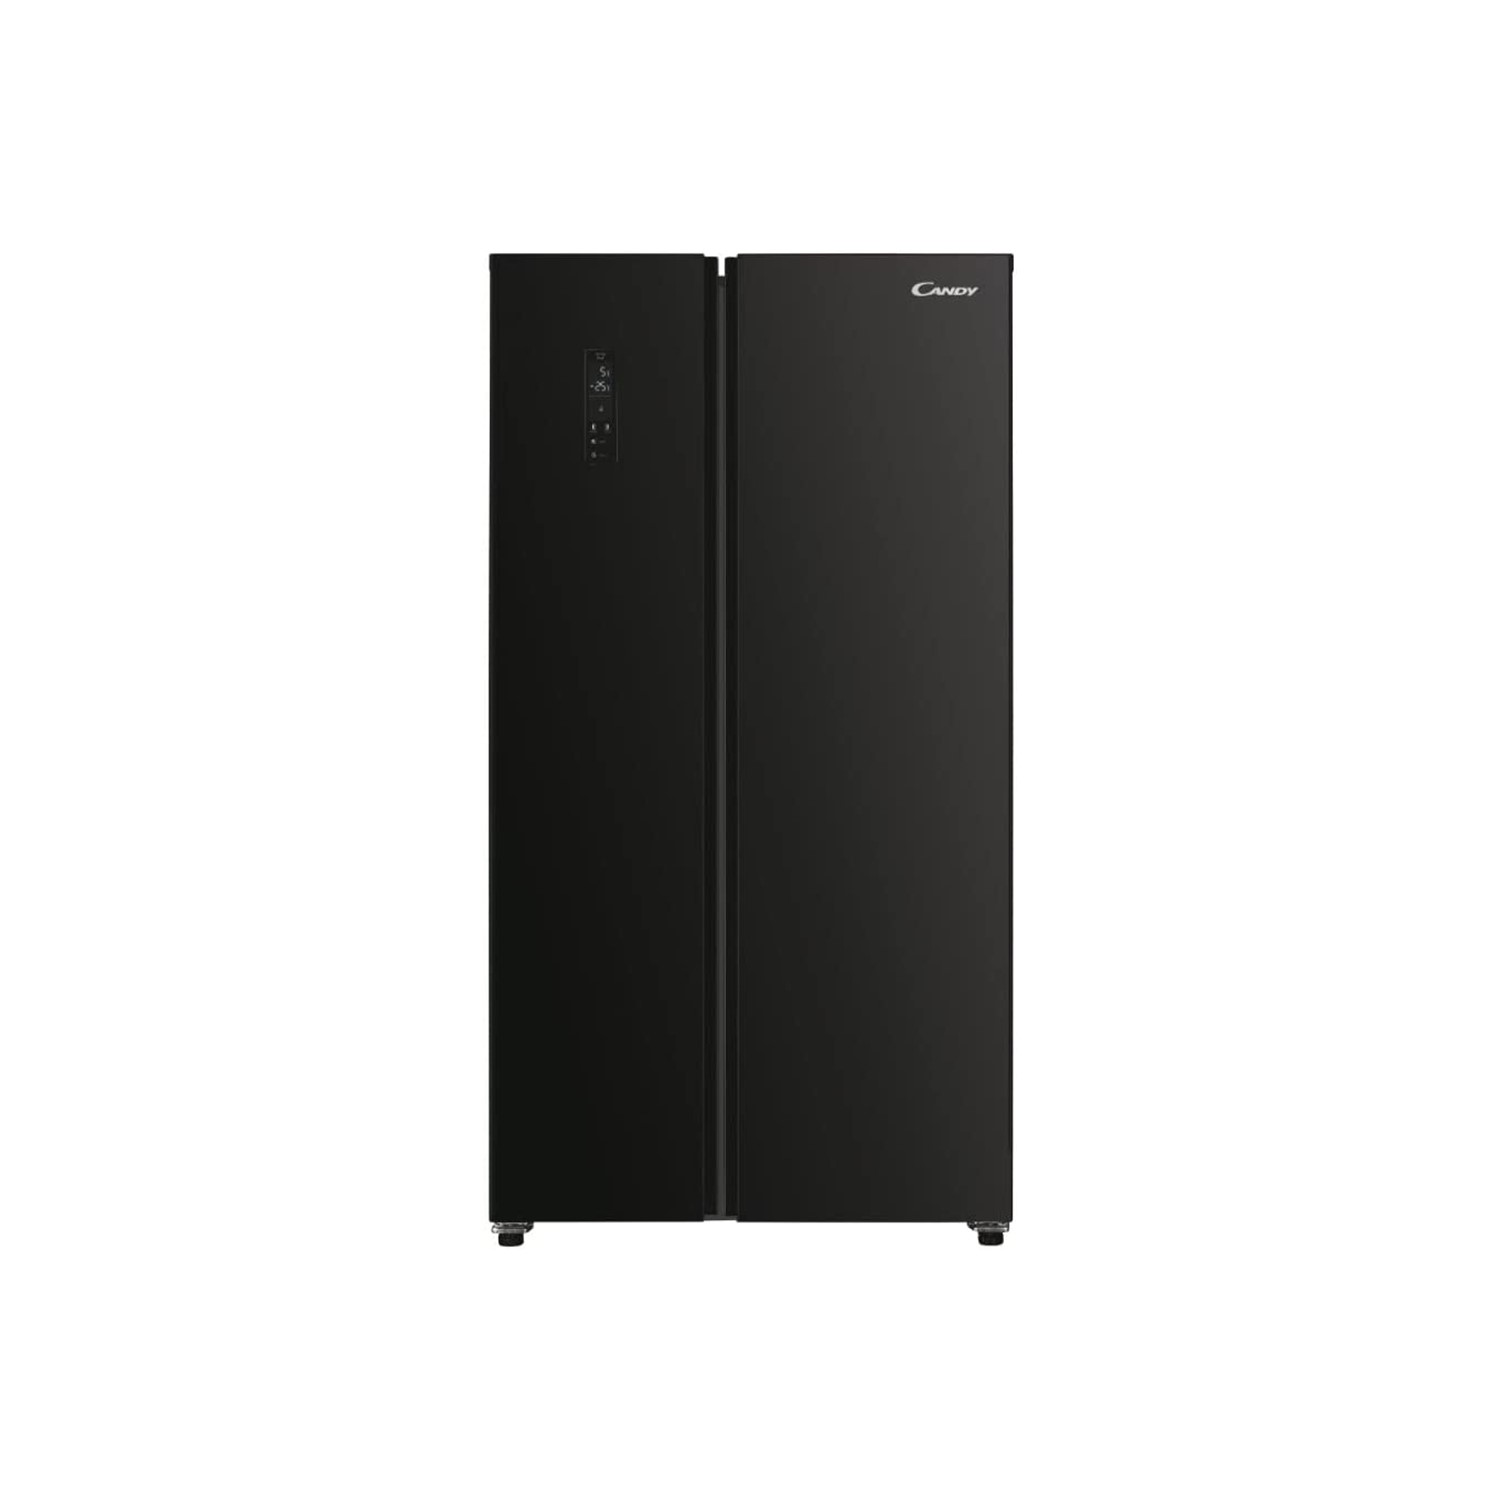 Photos - Other for Computer Candy 442 Litre Side-By-Side American Fridge Freezer - Black 34005132 